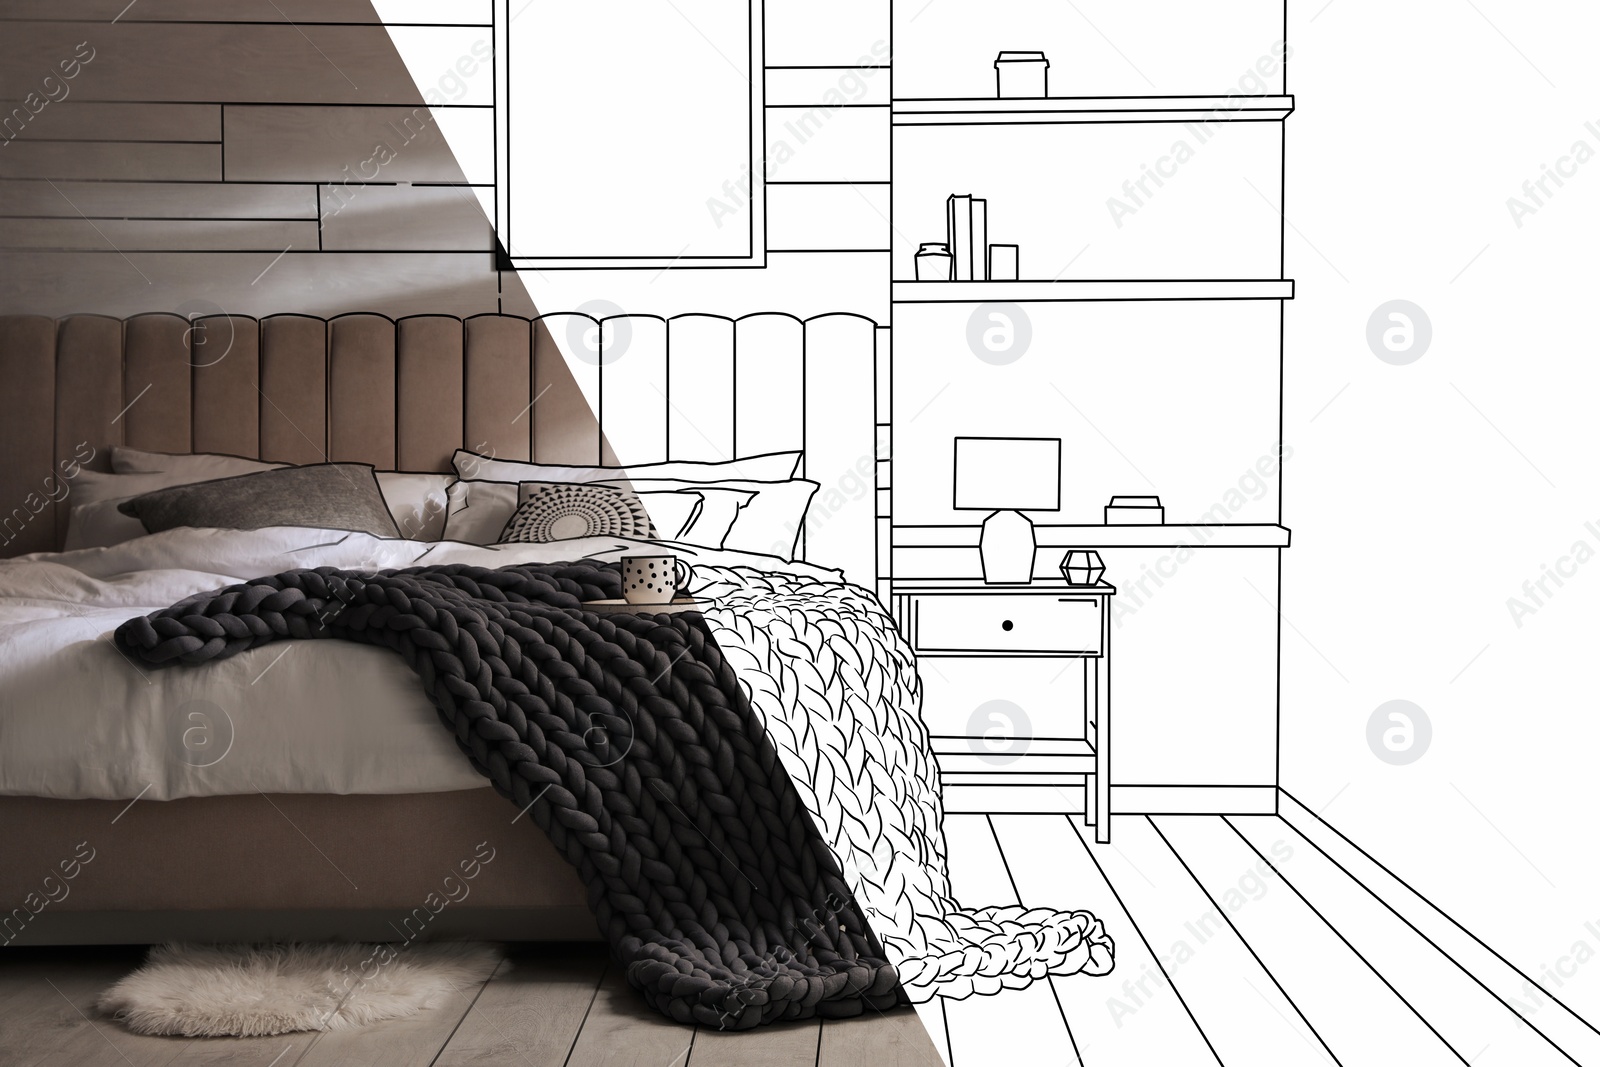 Image of From idea to realization. Cozy bedroom interior. Collage of photo and sketch